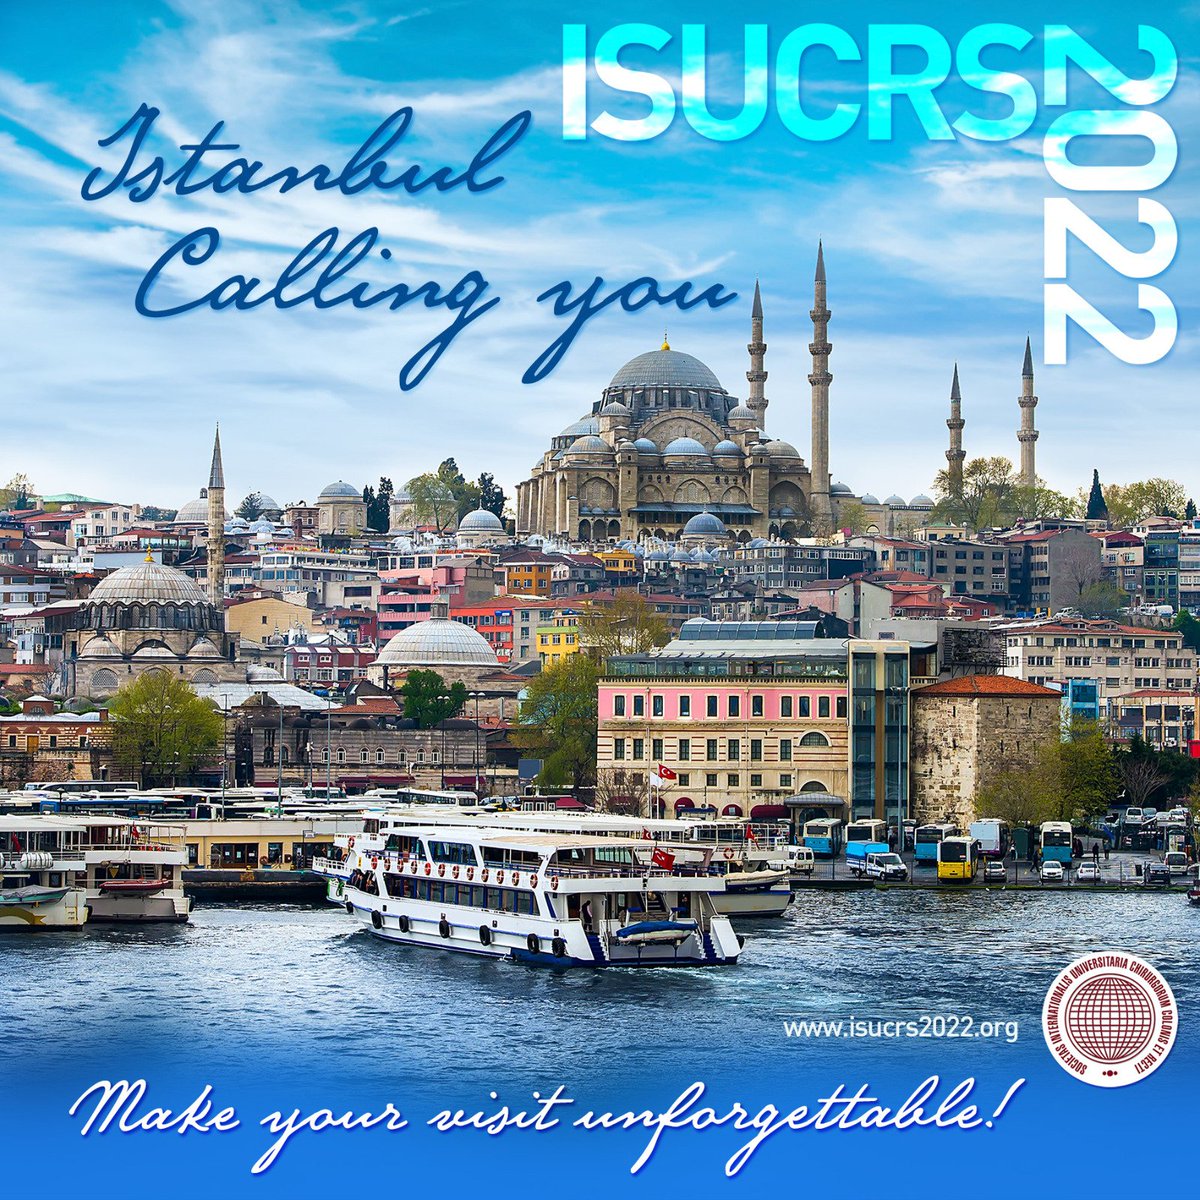 İstanbul Calling You! Plan your stay in istanbul and make your visit unforgettable... Please visit isucrs2022.org for details and contact Organizing Secretariat for your questions. #isucrs #isucrs2022 #istanbul #Türkiye